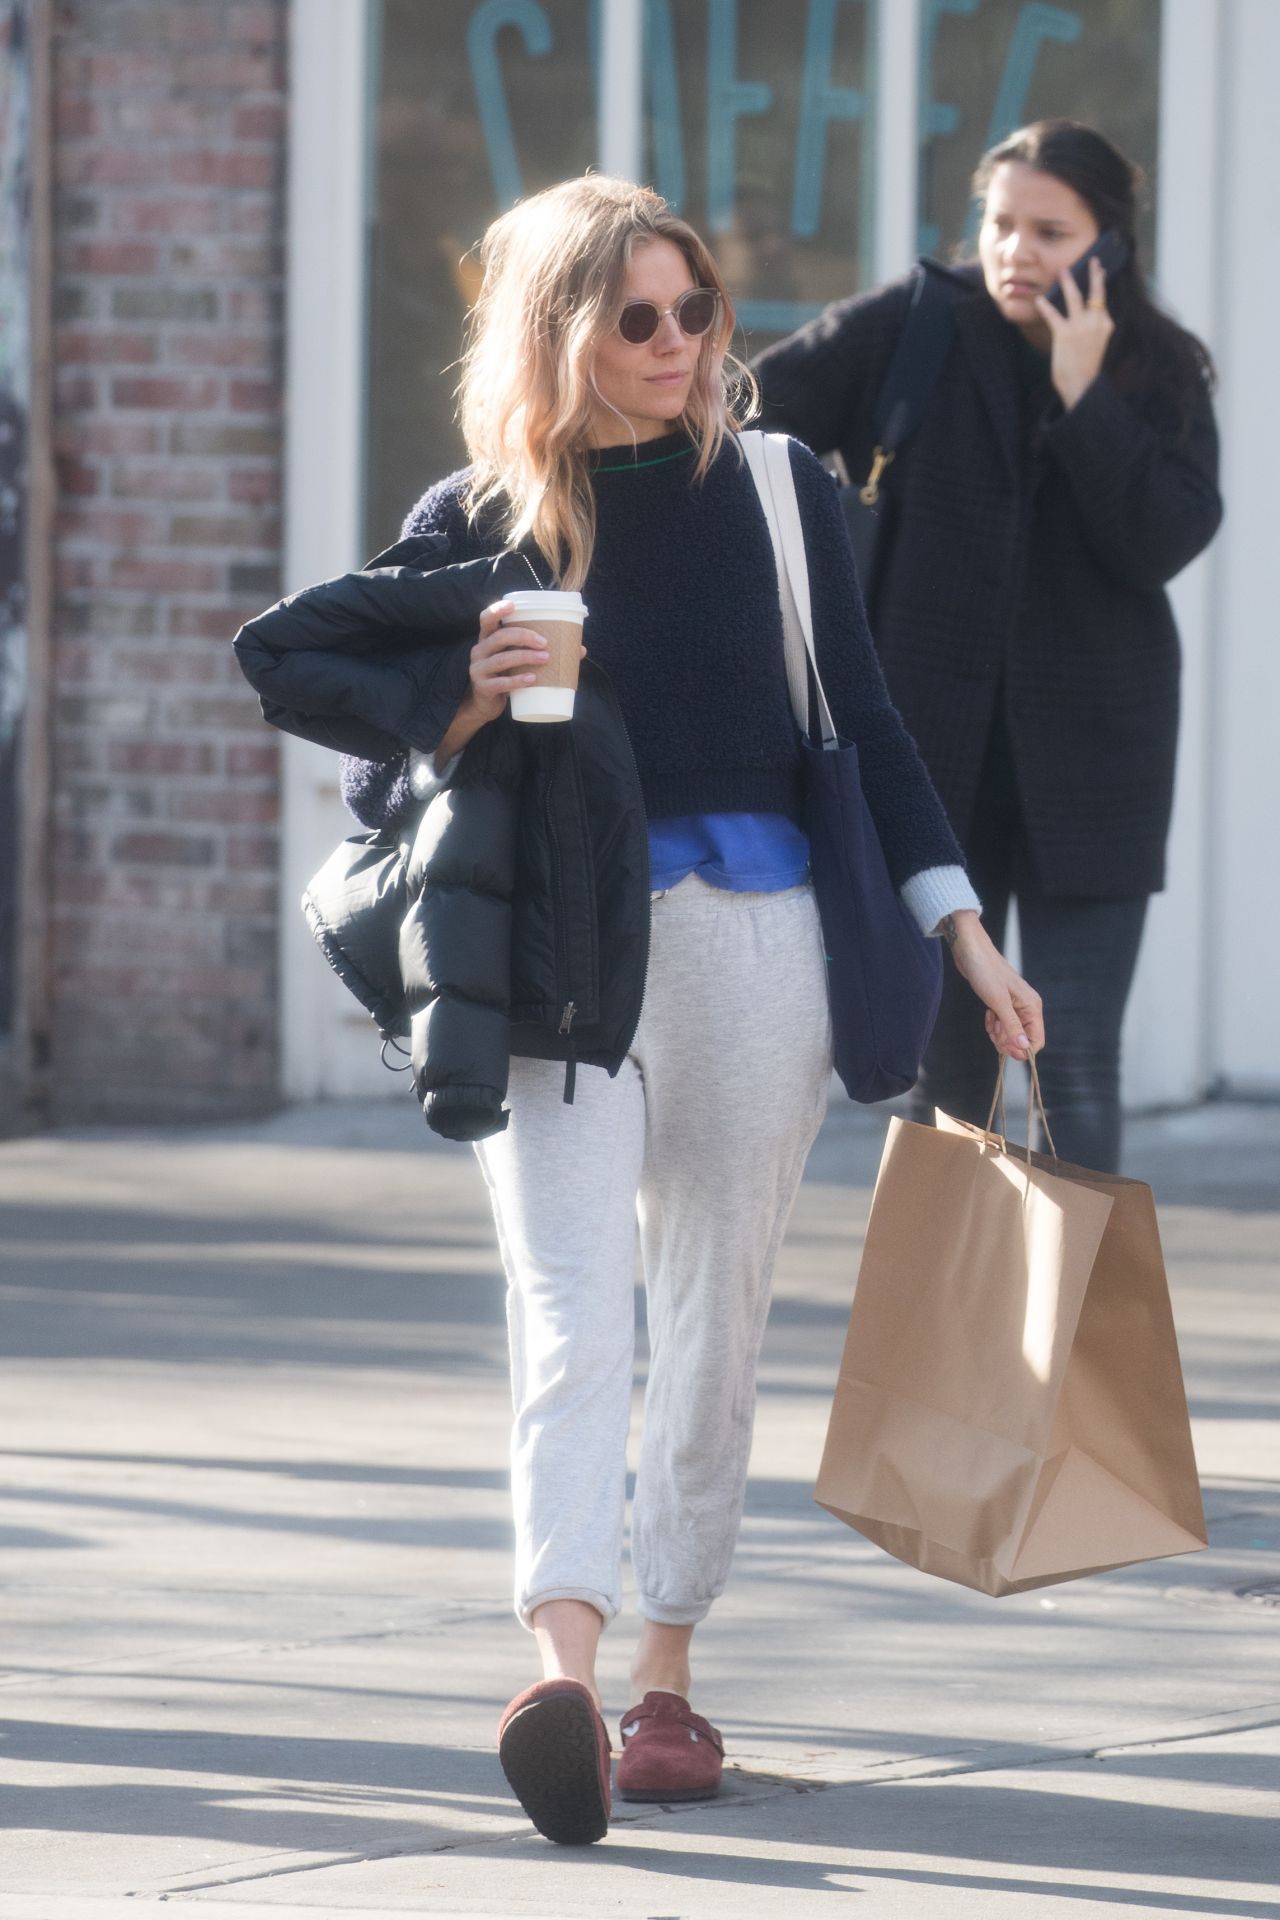 Sienna Miller New York City May 29, 2019 – Star Style